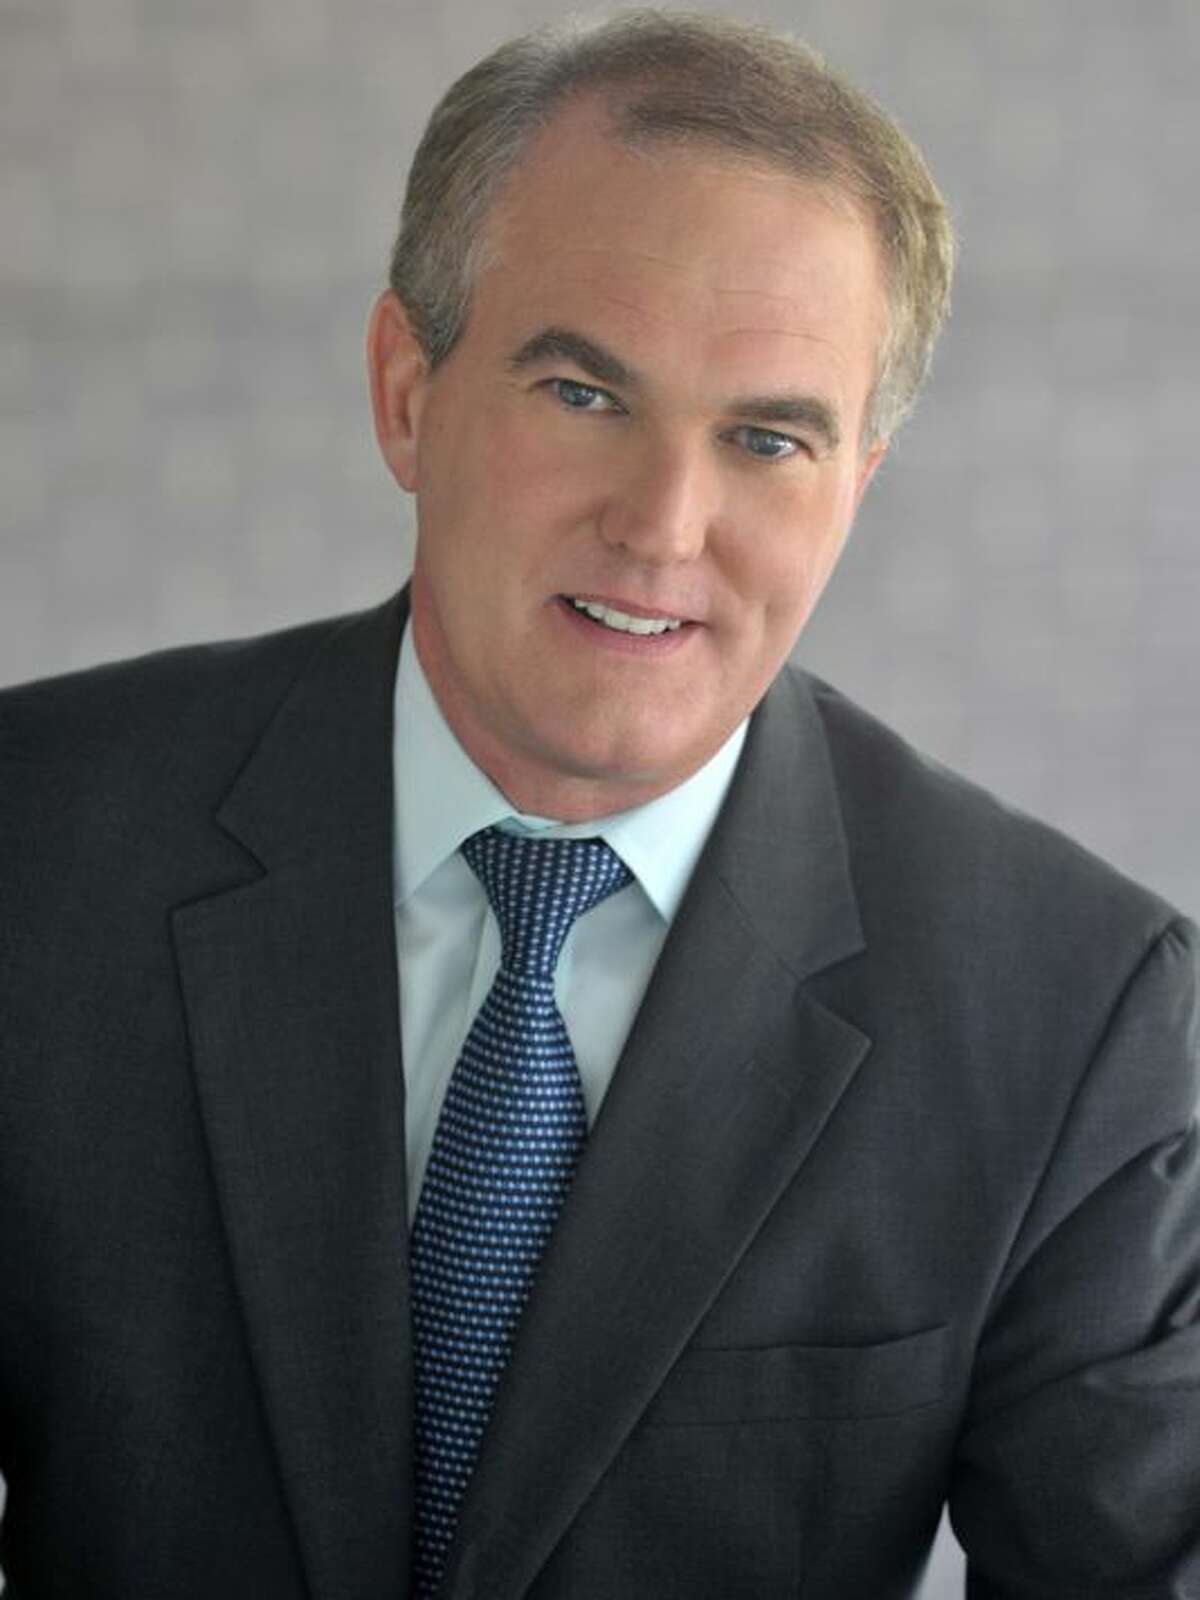 Doug Miller joined KHOU-TV as a reporter in 1993. Previously, Miller was the managing editor of the Houston Business Journal. In April 2016, he wrote on Facebook that he had accepted a buyout offer from TEGNA, Channel 11's corporate owners, and would be leaving the station.